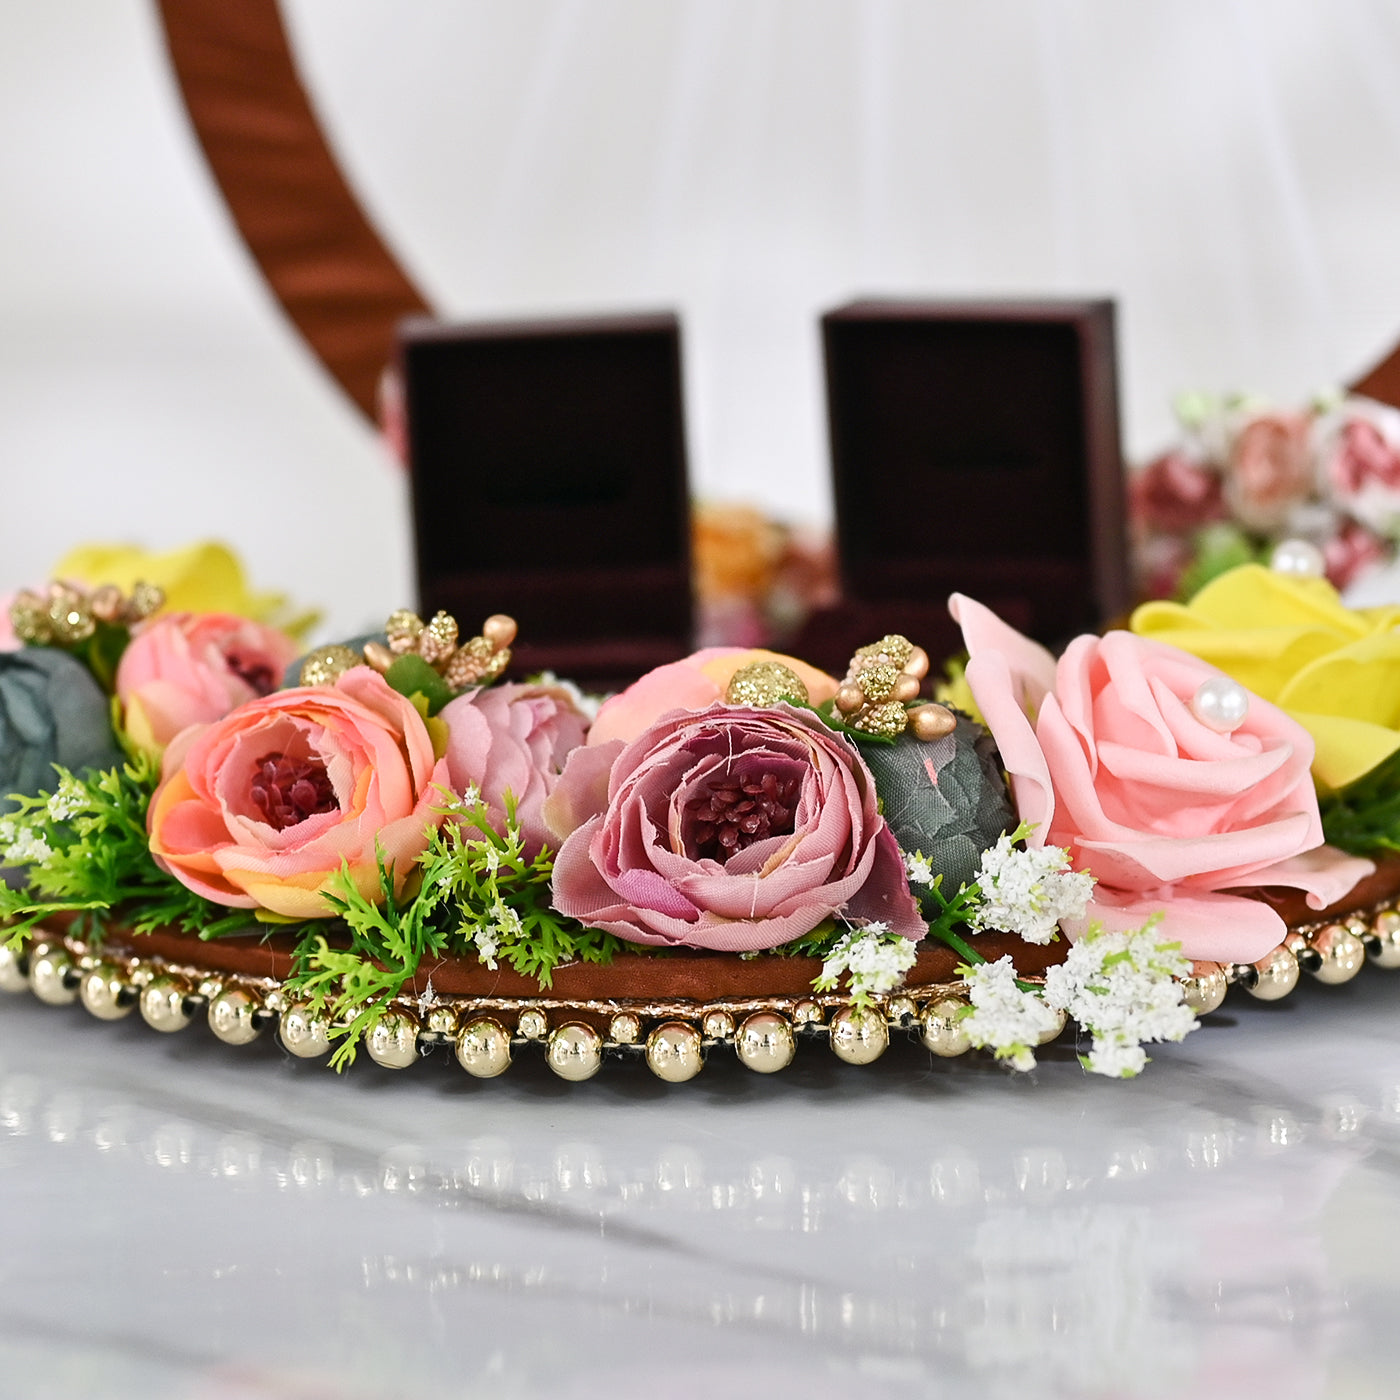 Buy GiftsBouquet Wood Smart Creations Decorative Customized Round Shape Engagement  Ring Platter Tray For Ring Ceremony With Name And Led, Pink Online at Low  Prices in India - Amazon.in